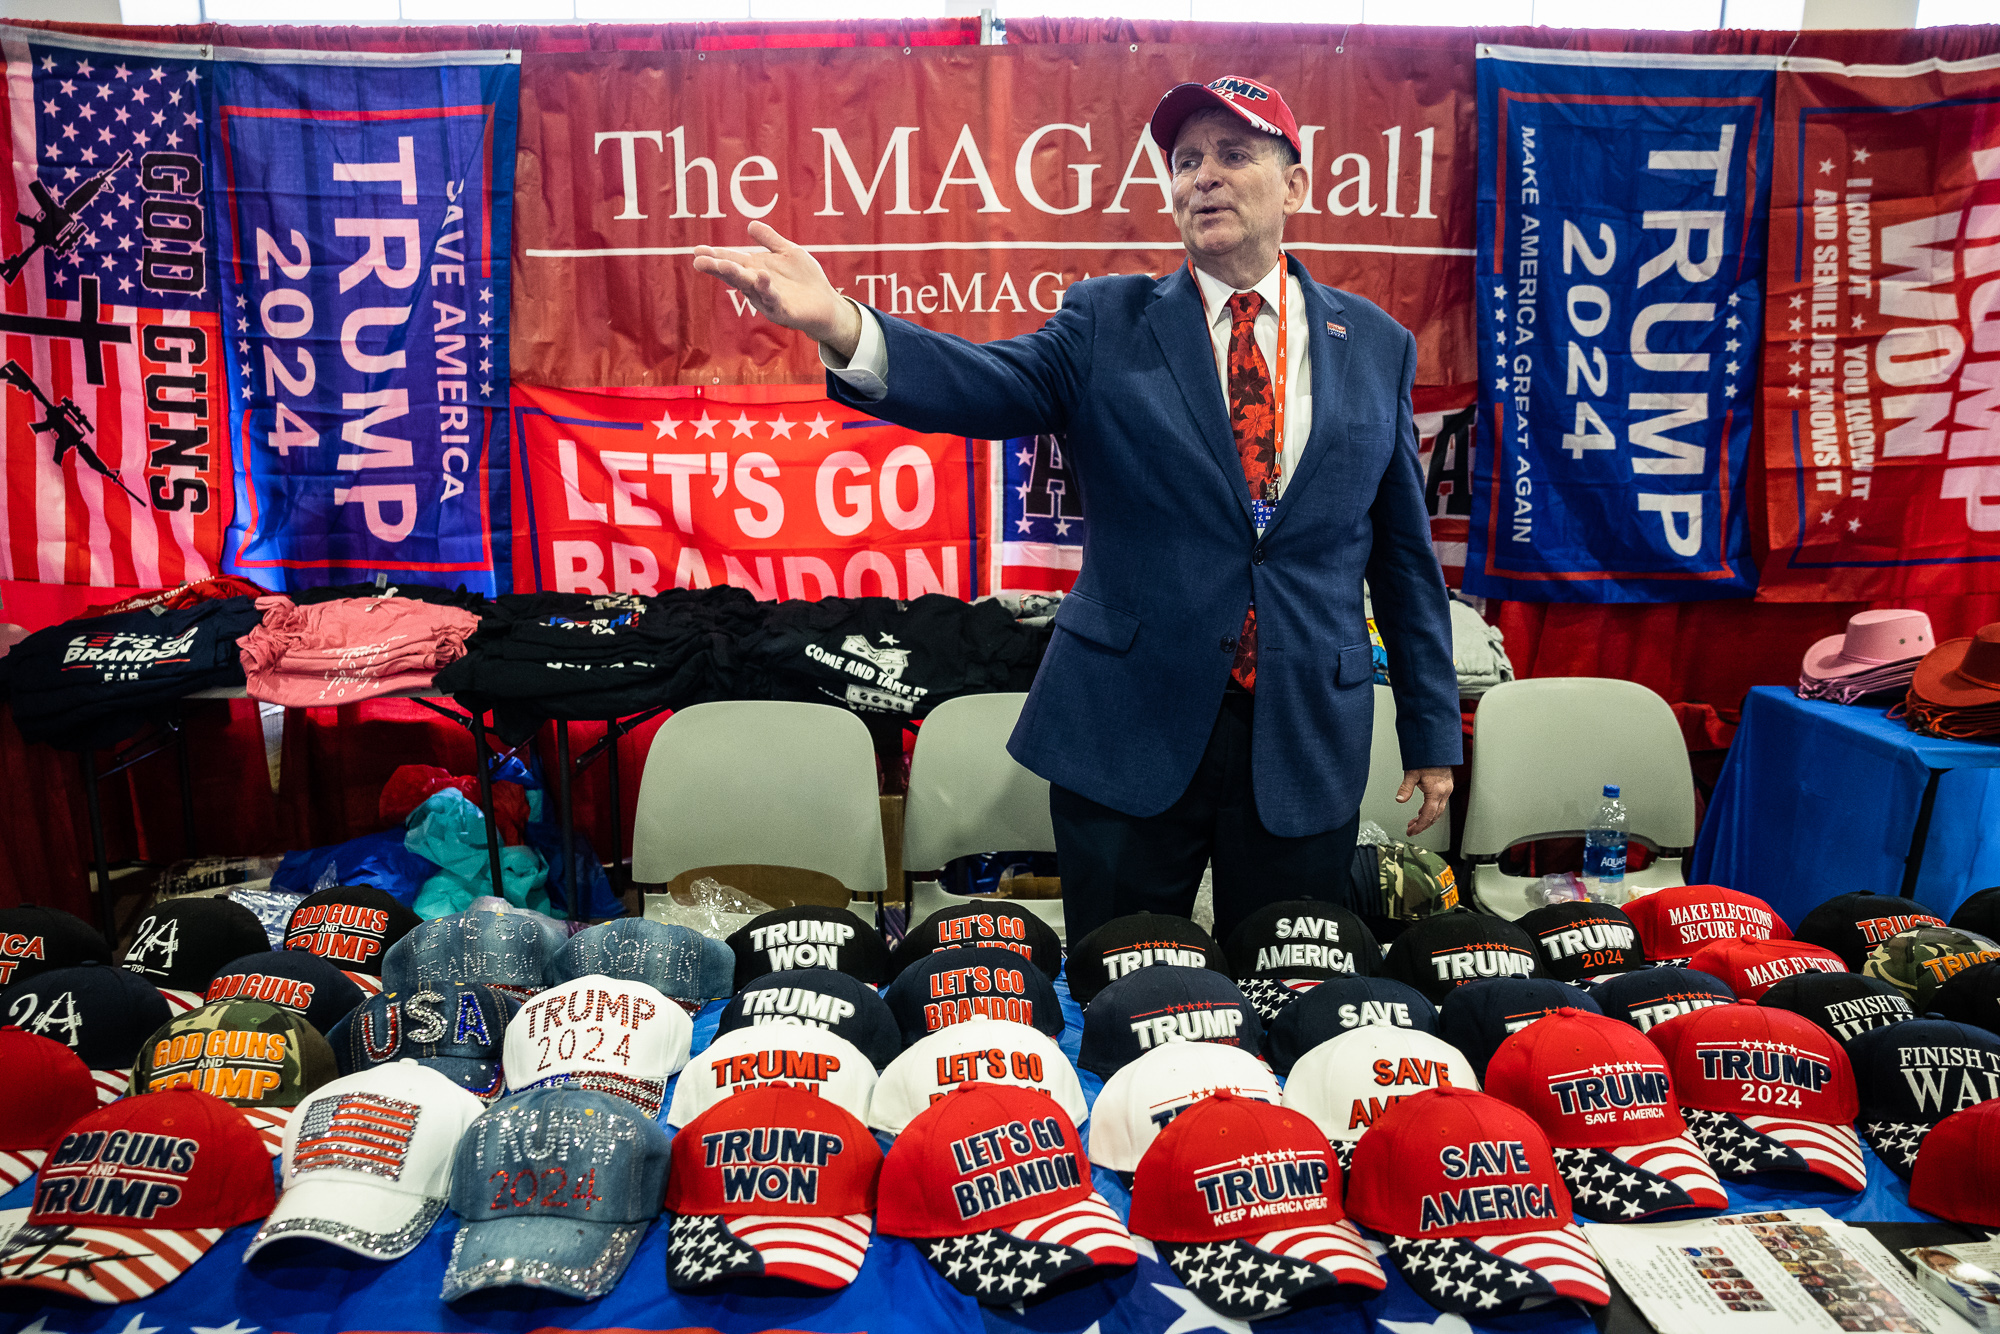 Ronald Solomon sold merchandise at his stand, The MAGA Mall, where there were plenty of pro-Trump items to choose from.